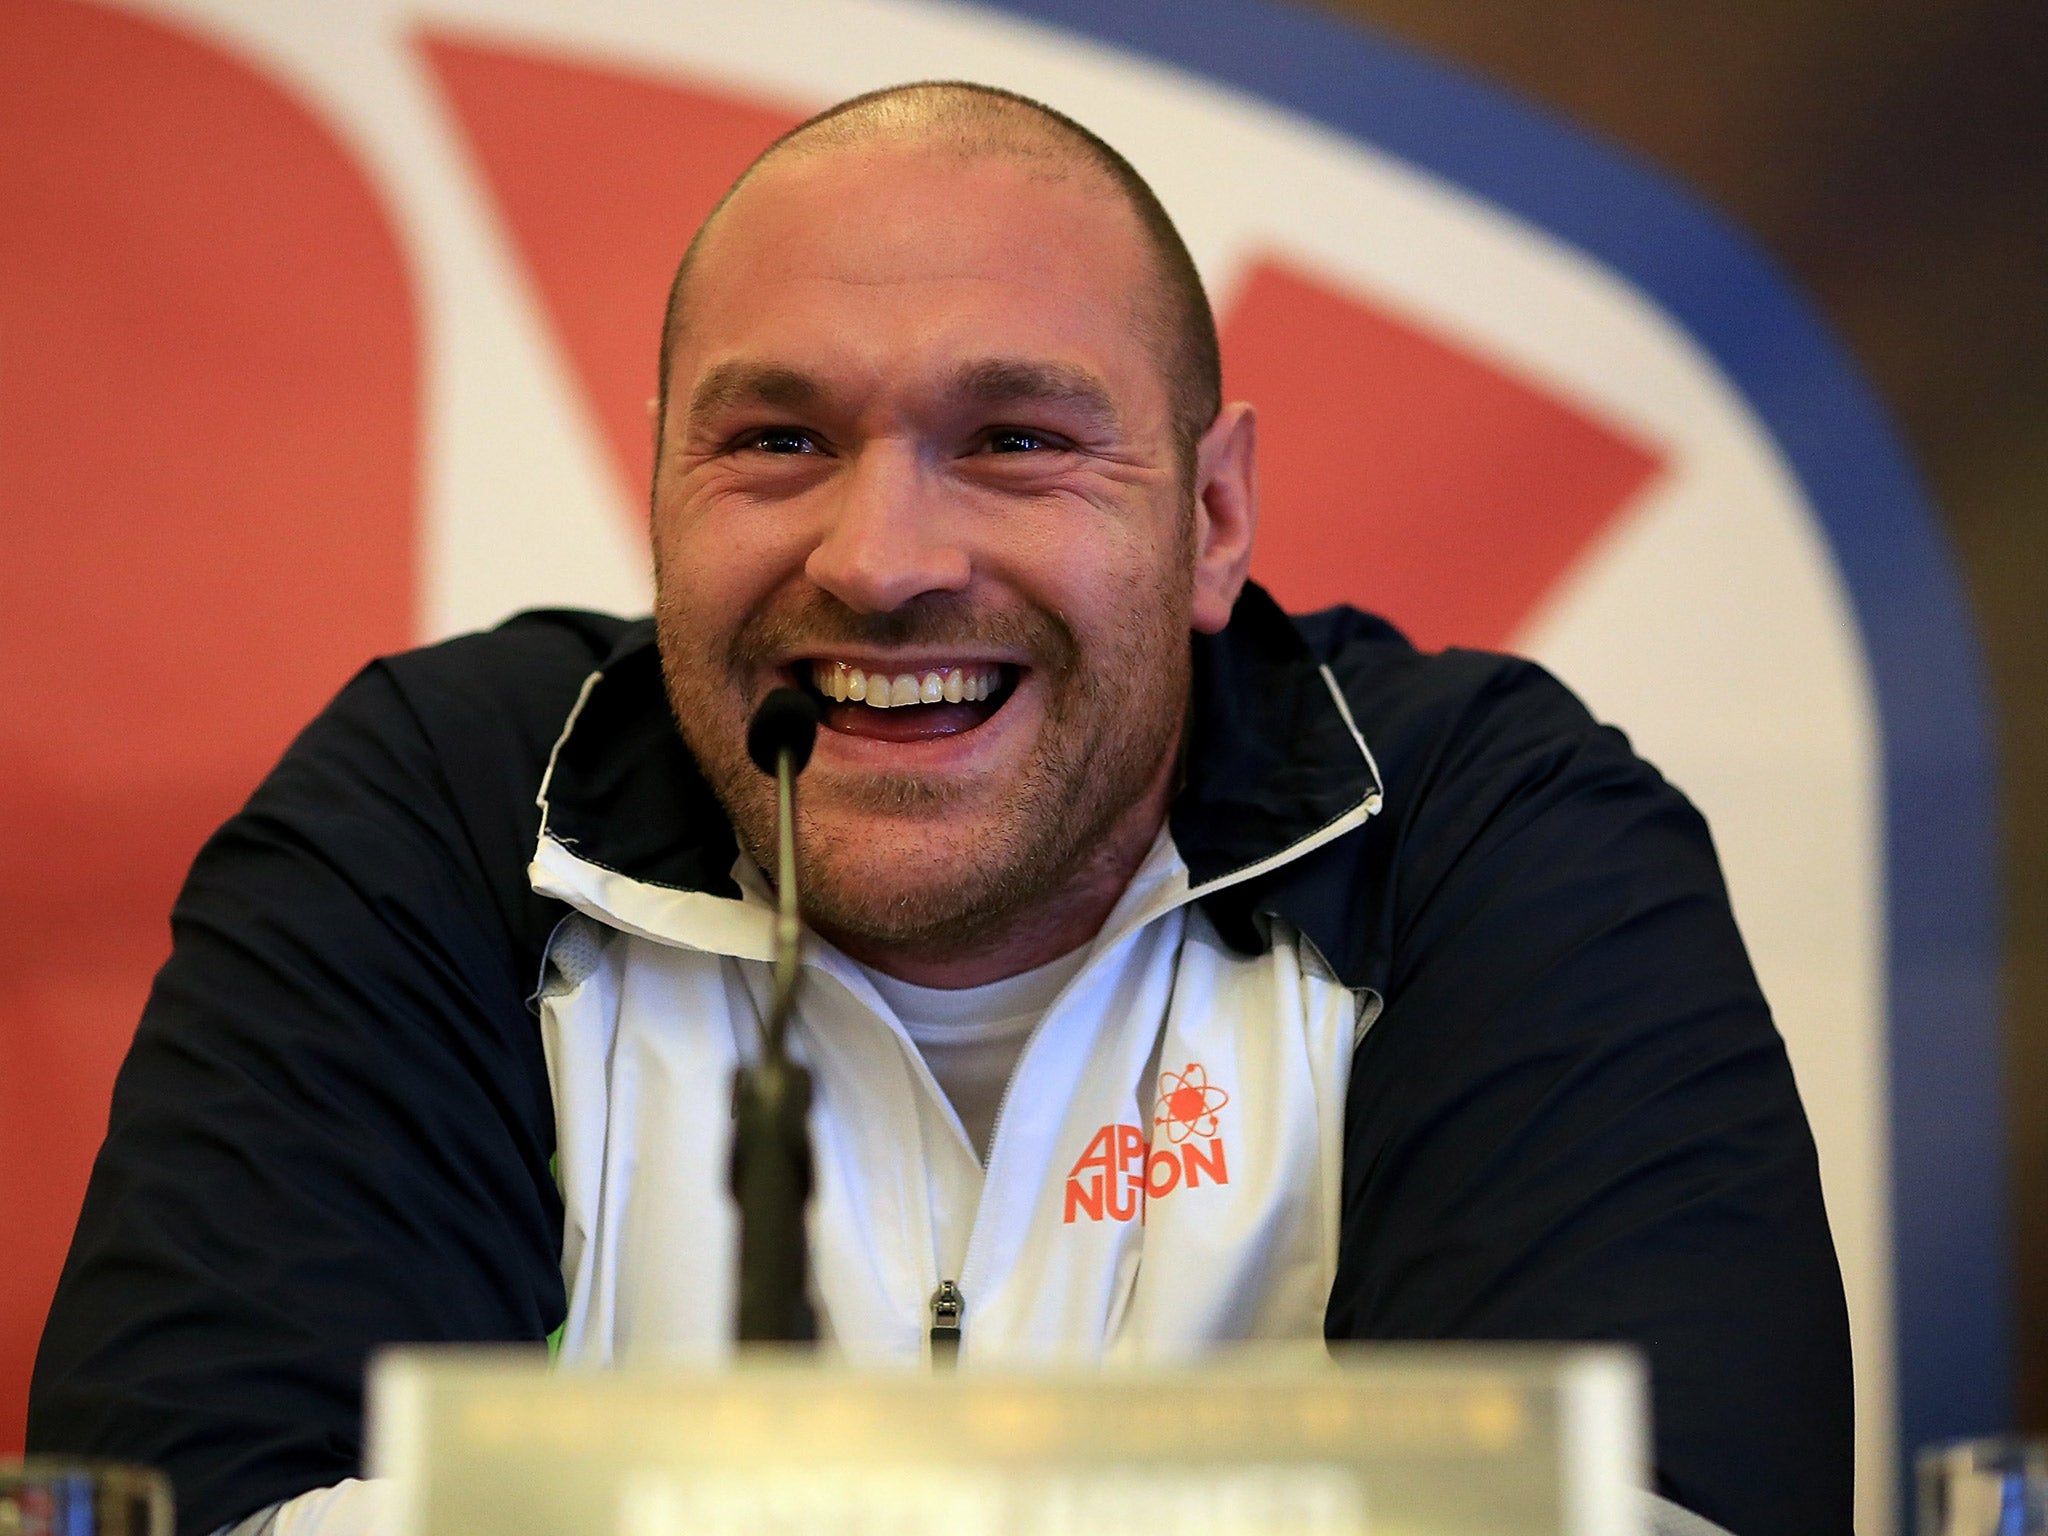 Tyson Fury speaks at a press conference to announce the venue of his rematch with Wladimir Klitschko